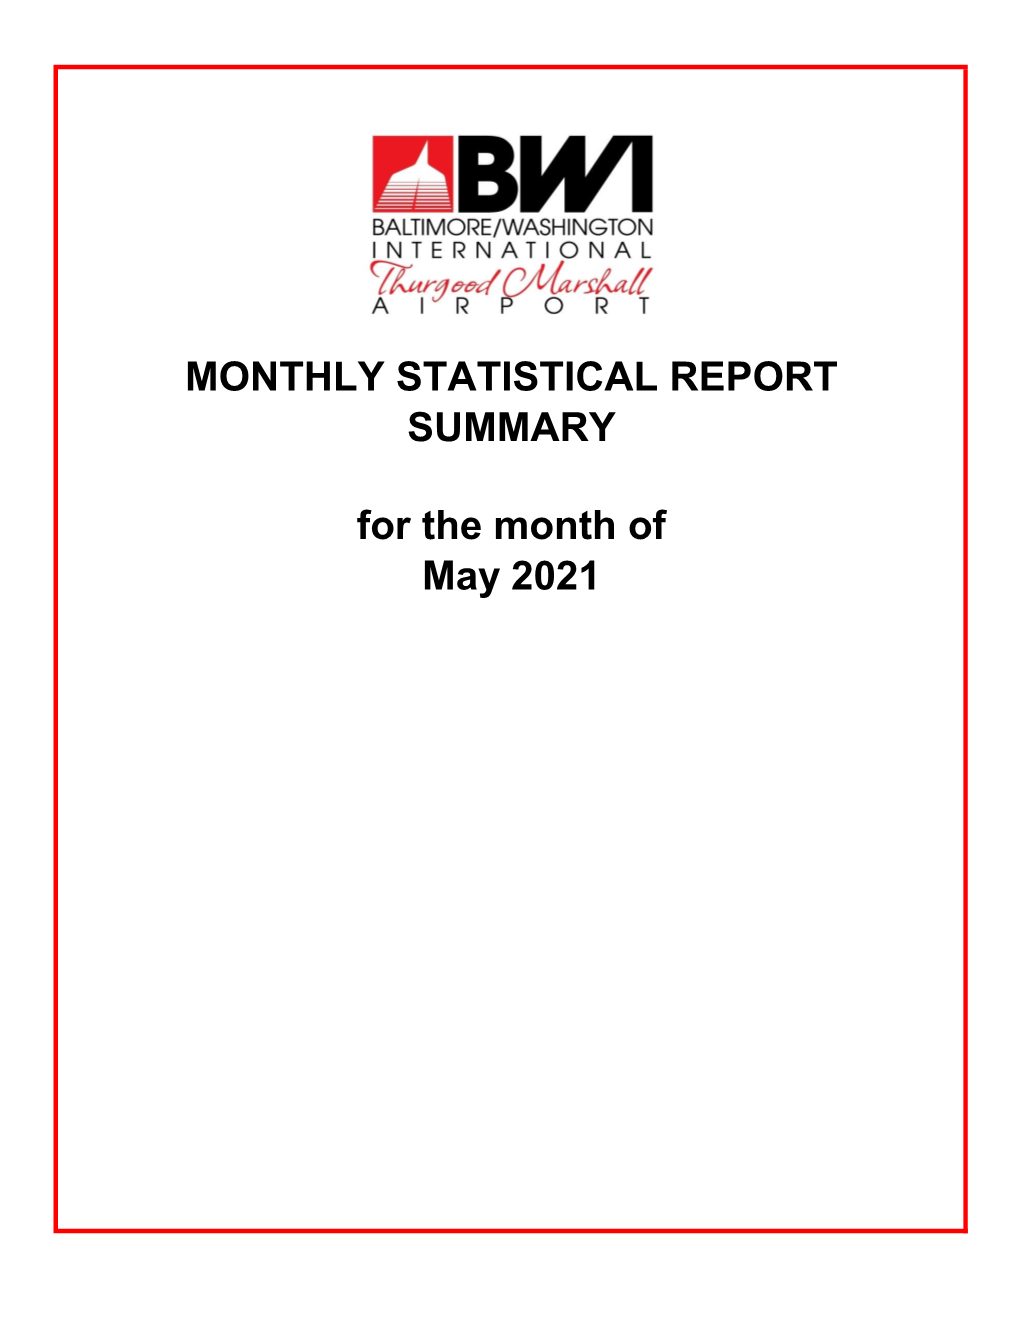 May 2021 SUMMARY MONTHLY STATISTICAL REPORT for The